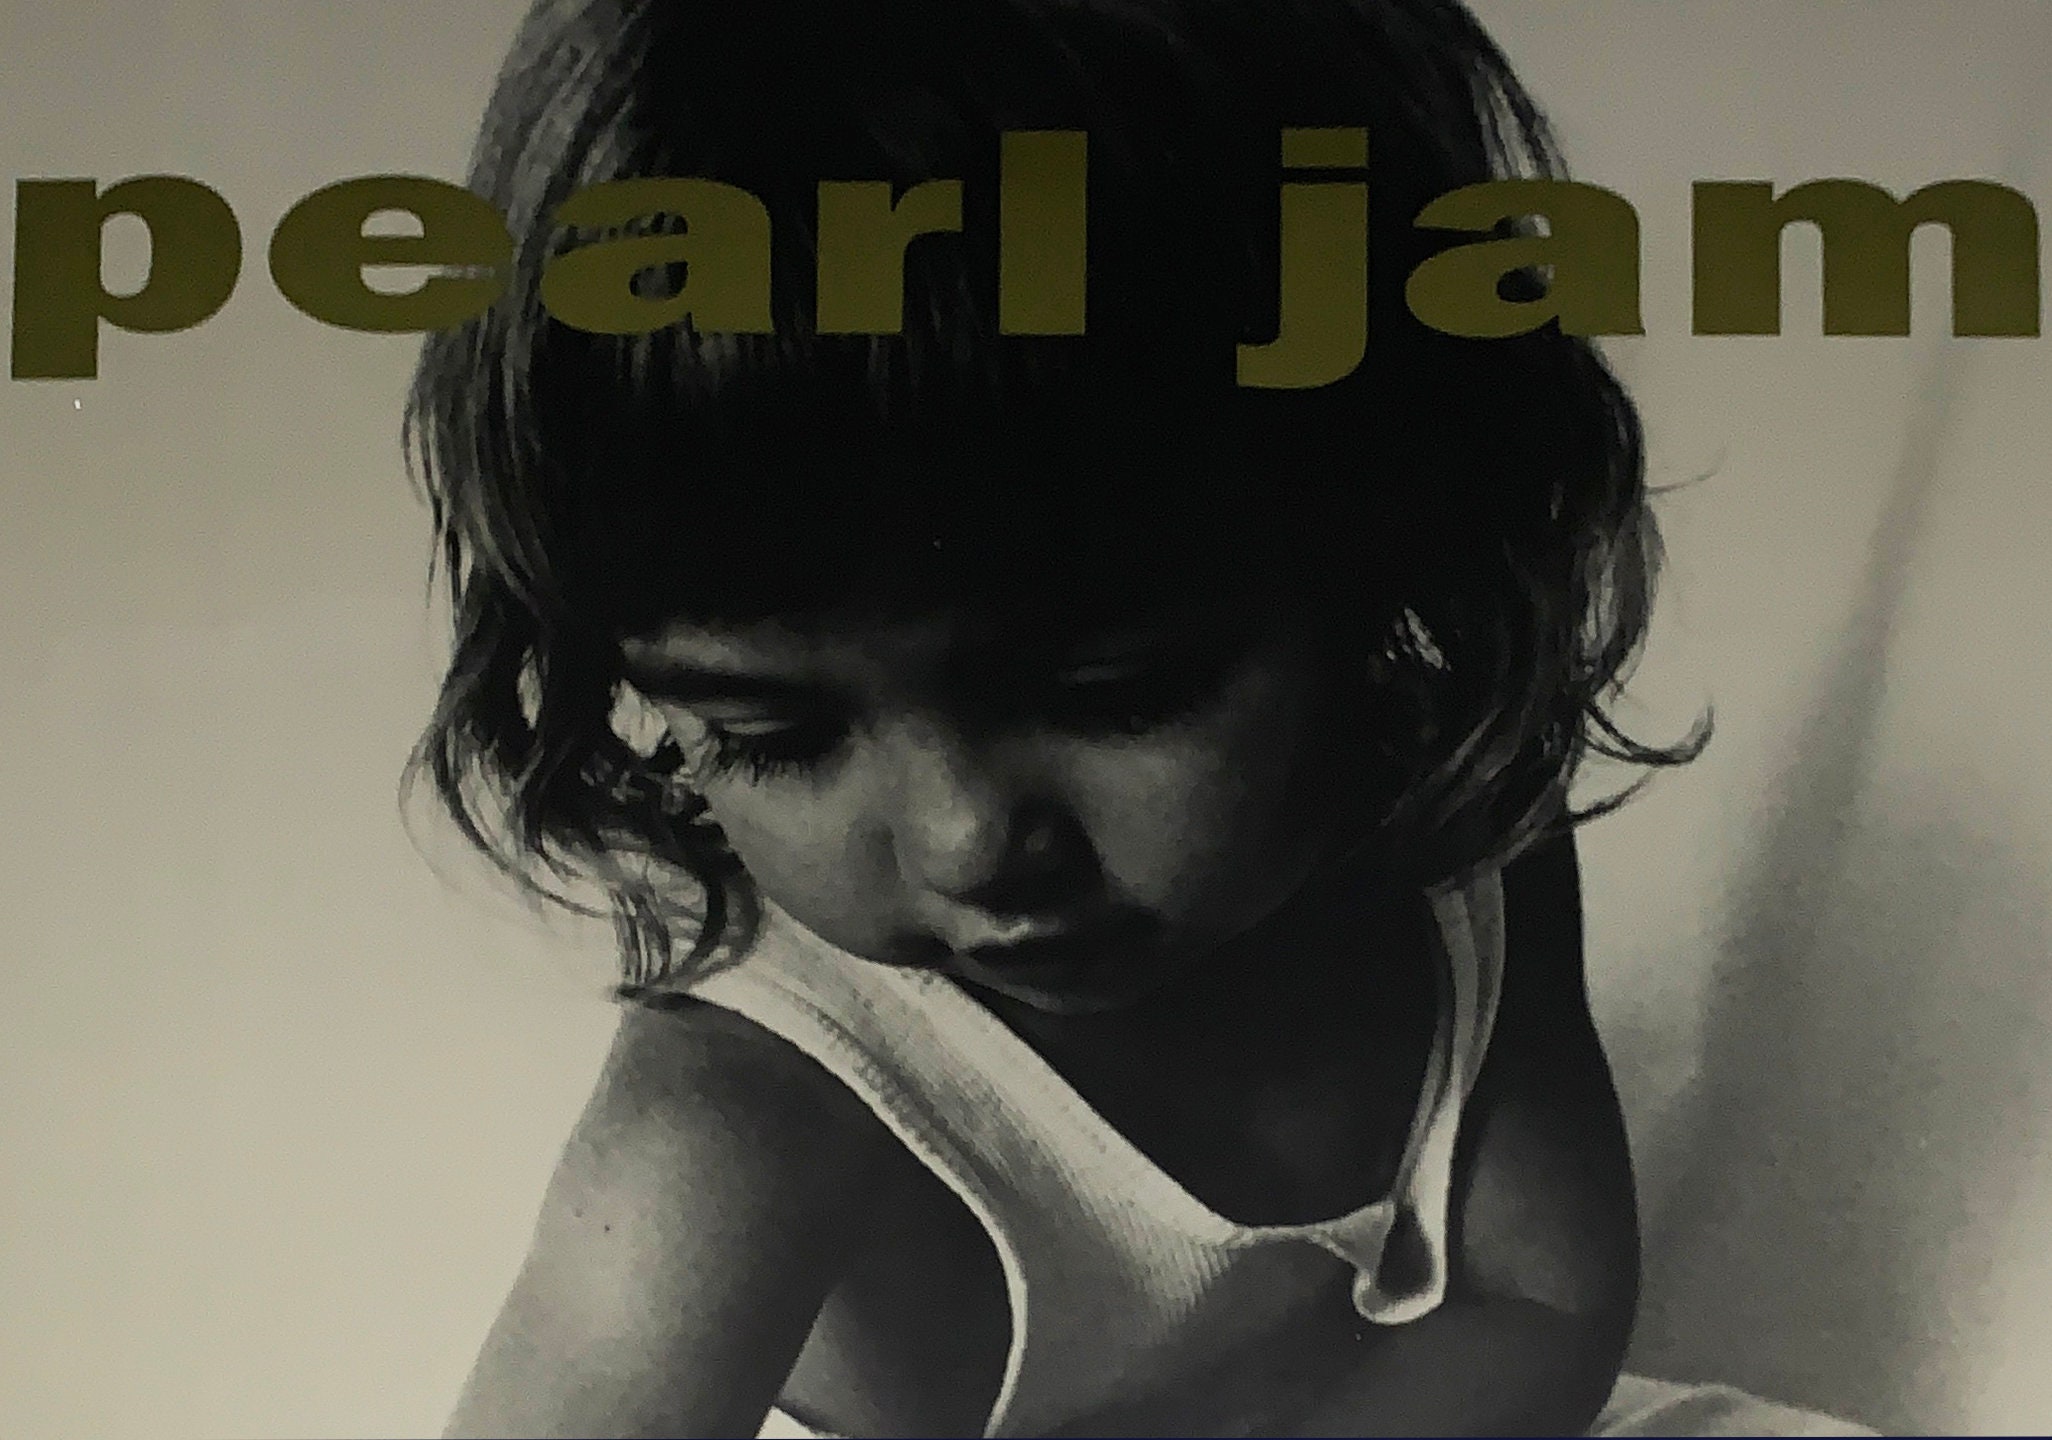 pearl jam choices poster